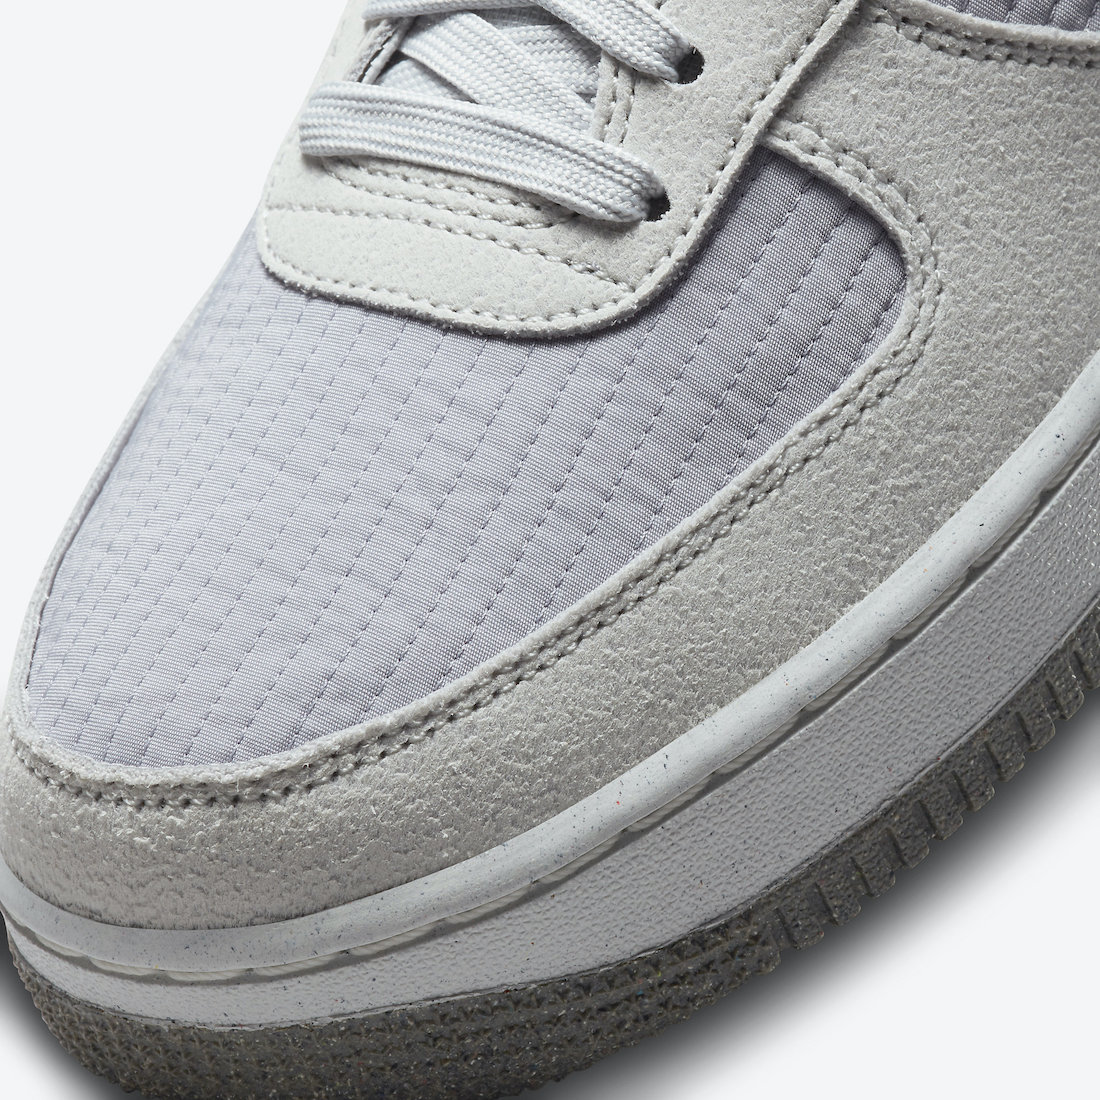 Nike Air Force 1 Low Toasty DC8871-002 Release Date